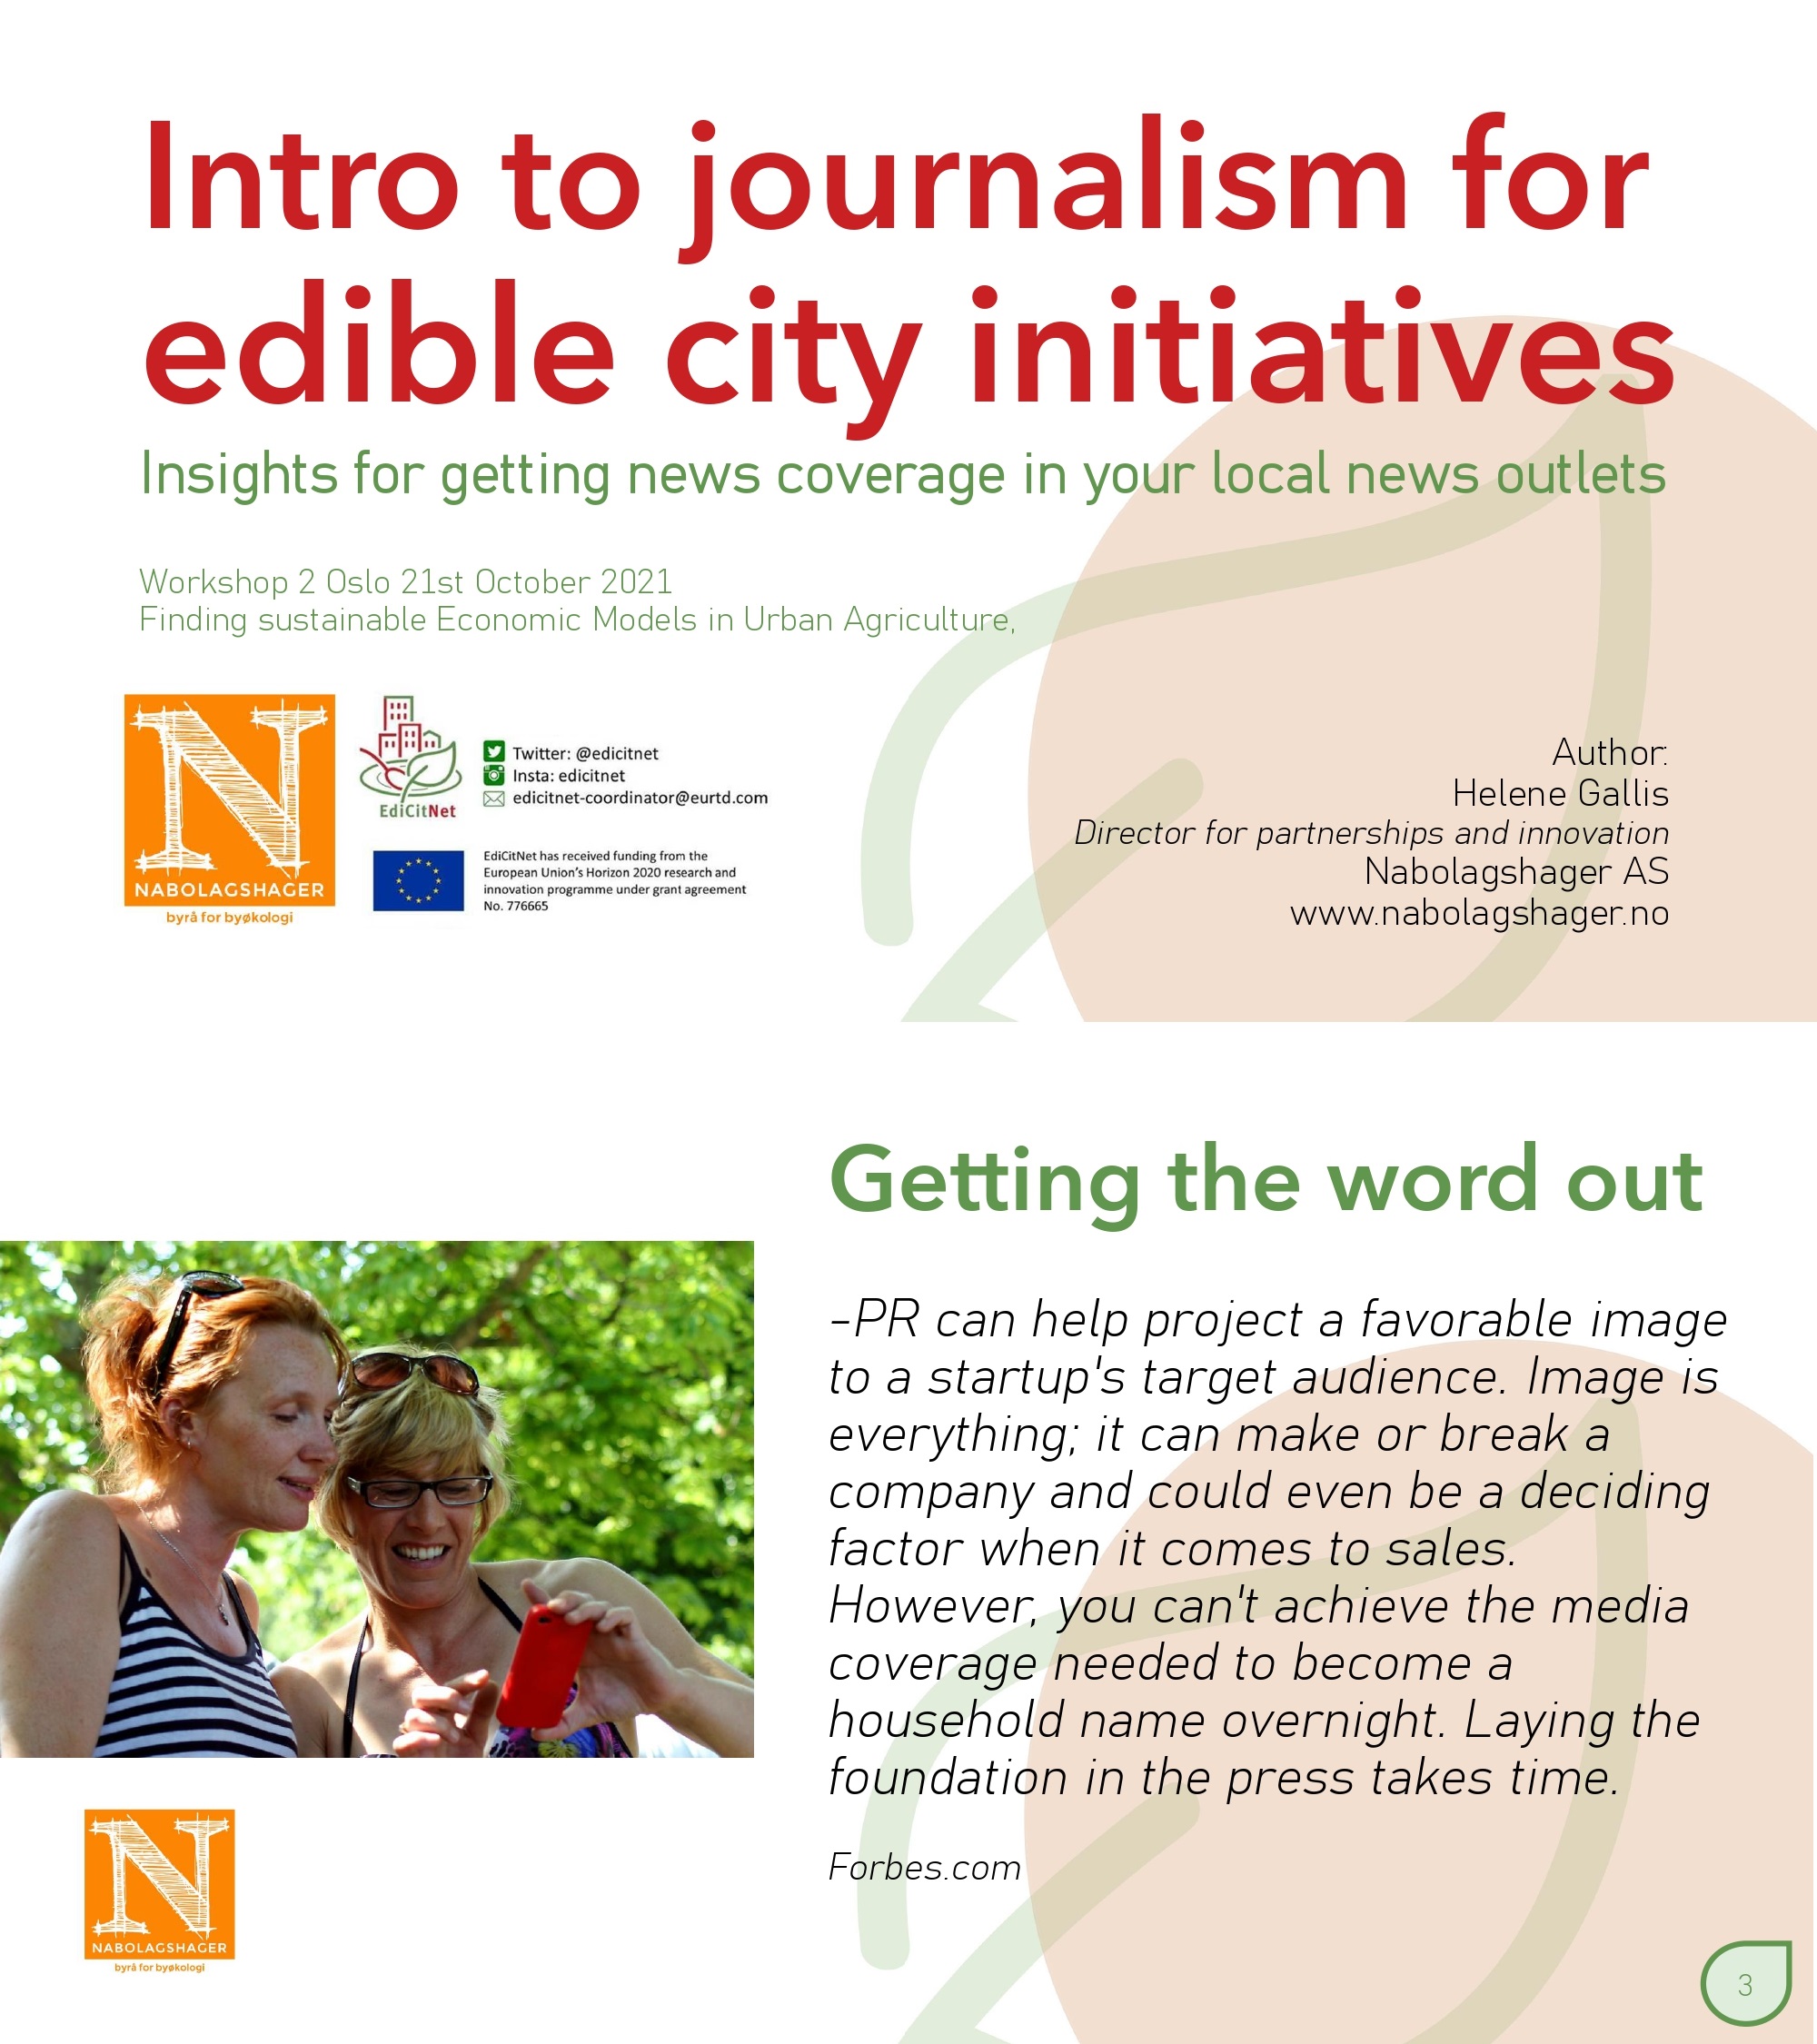 Media guide for edible city initiatives